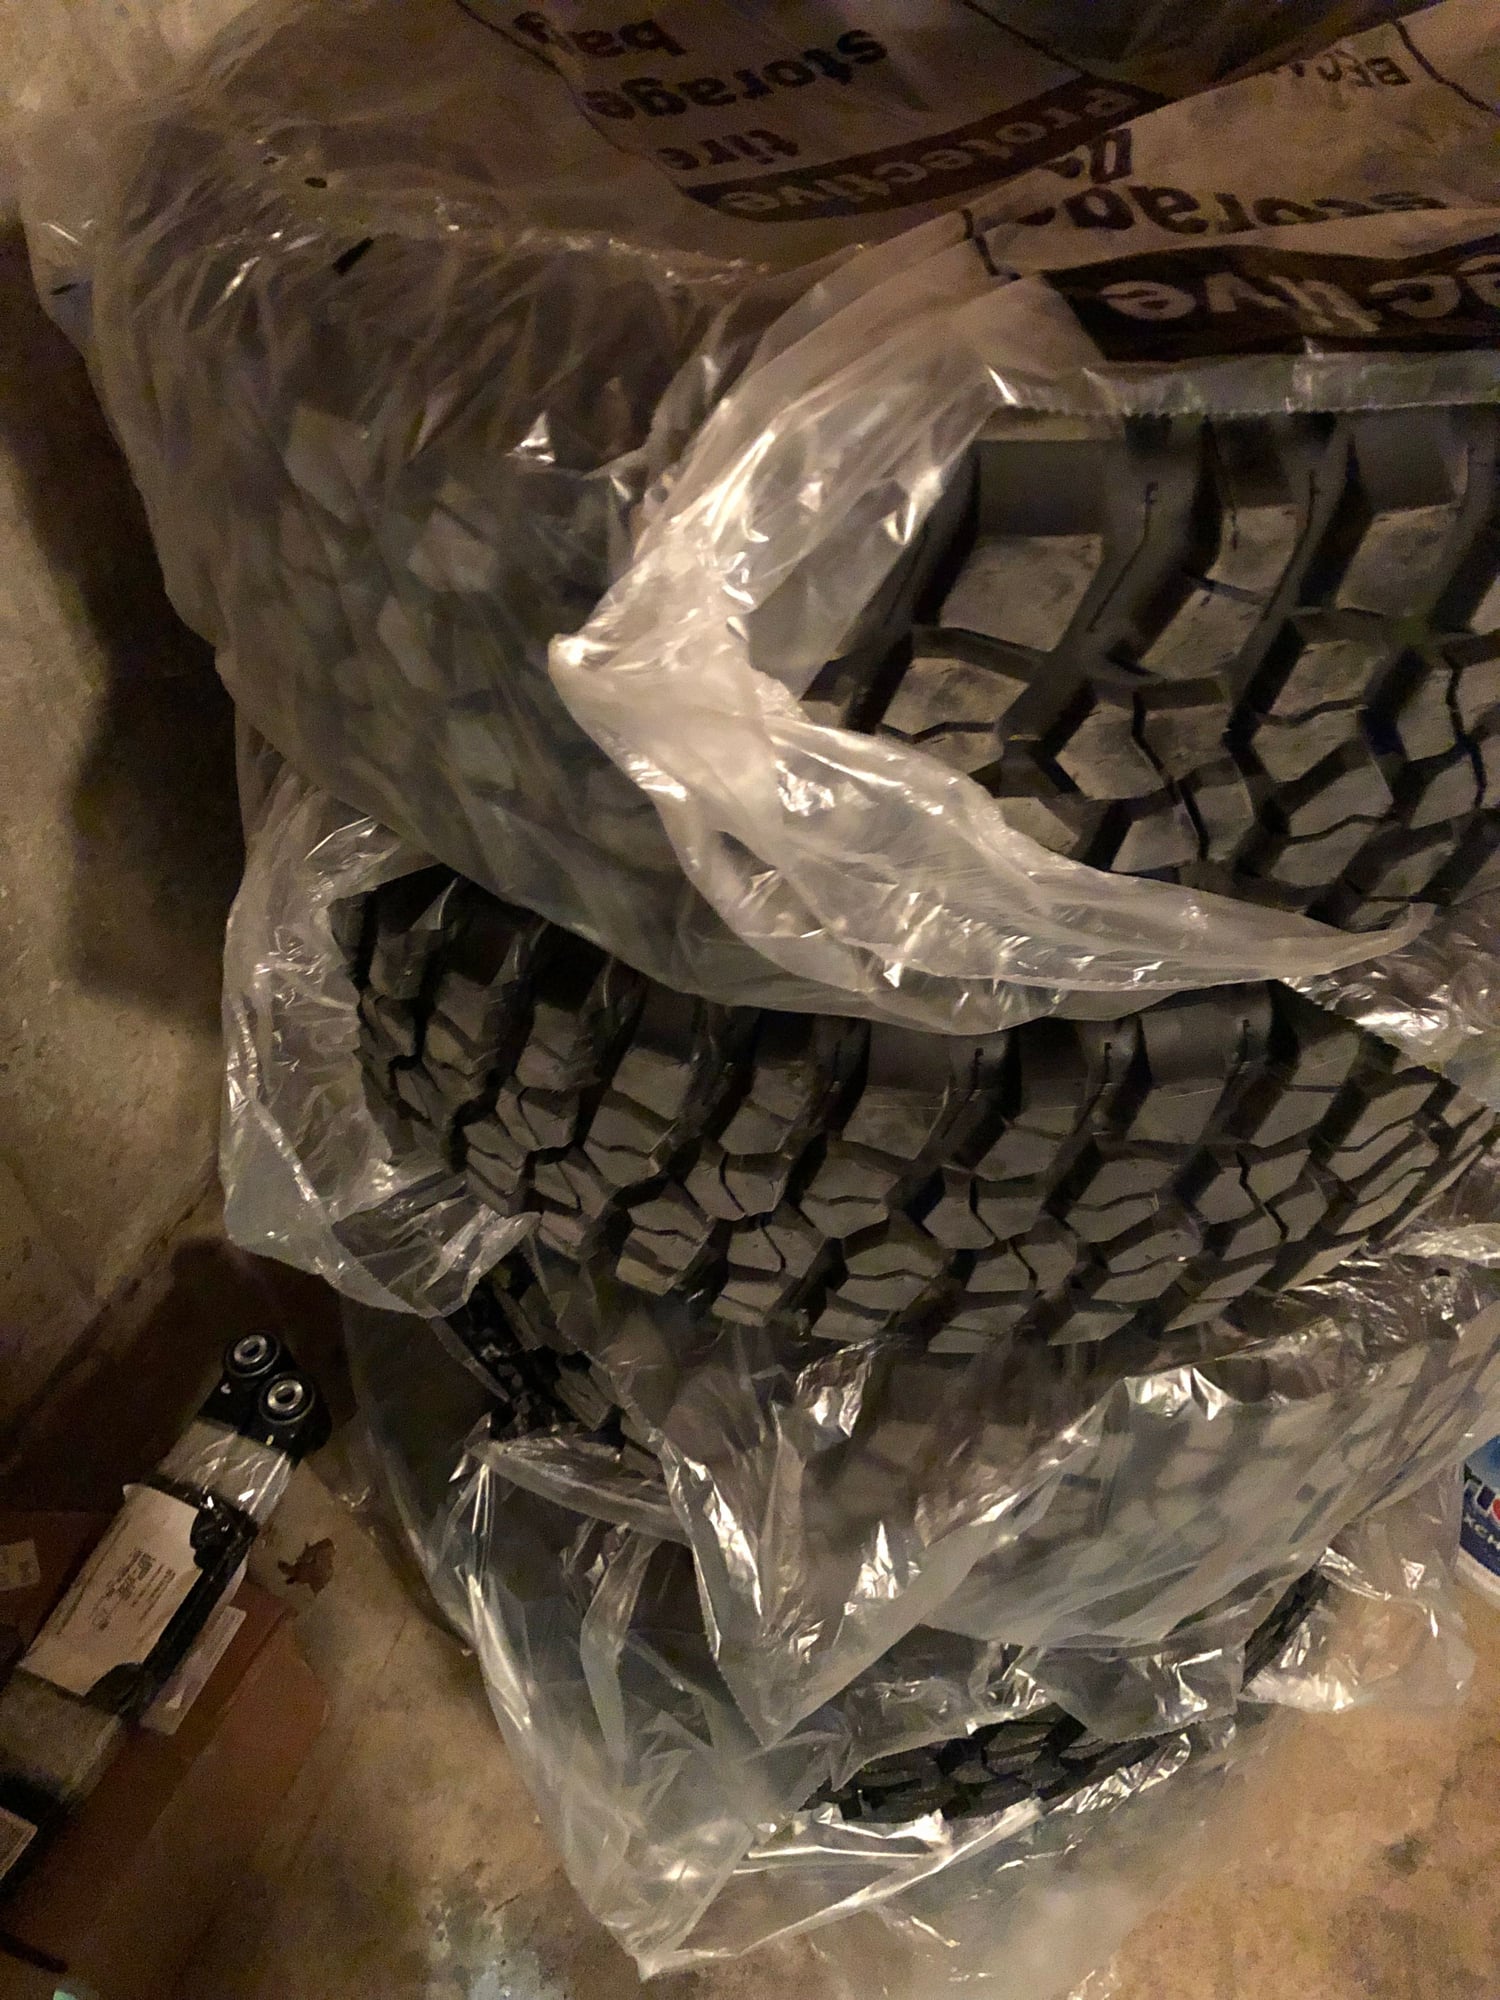 Wheels and Tires/Axles - FS: (5) 255/75/17 BFGoodrich KM2 new take offs - Used - All Years Jeep Wrangler - Bloomingdale, IL 60108, United States